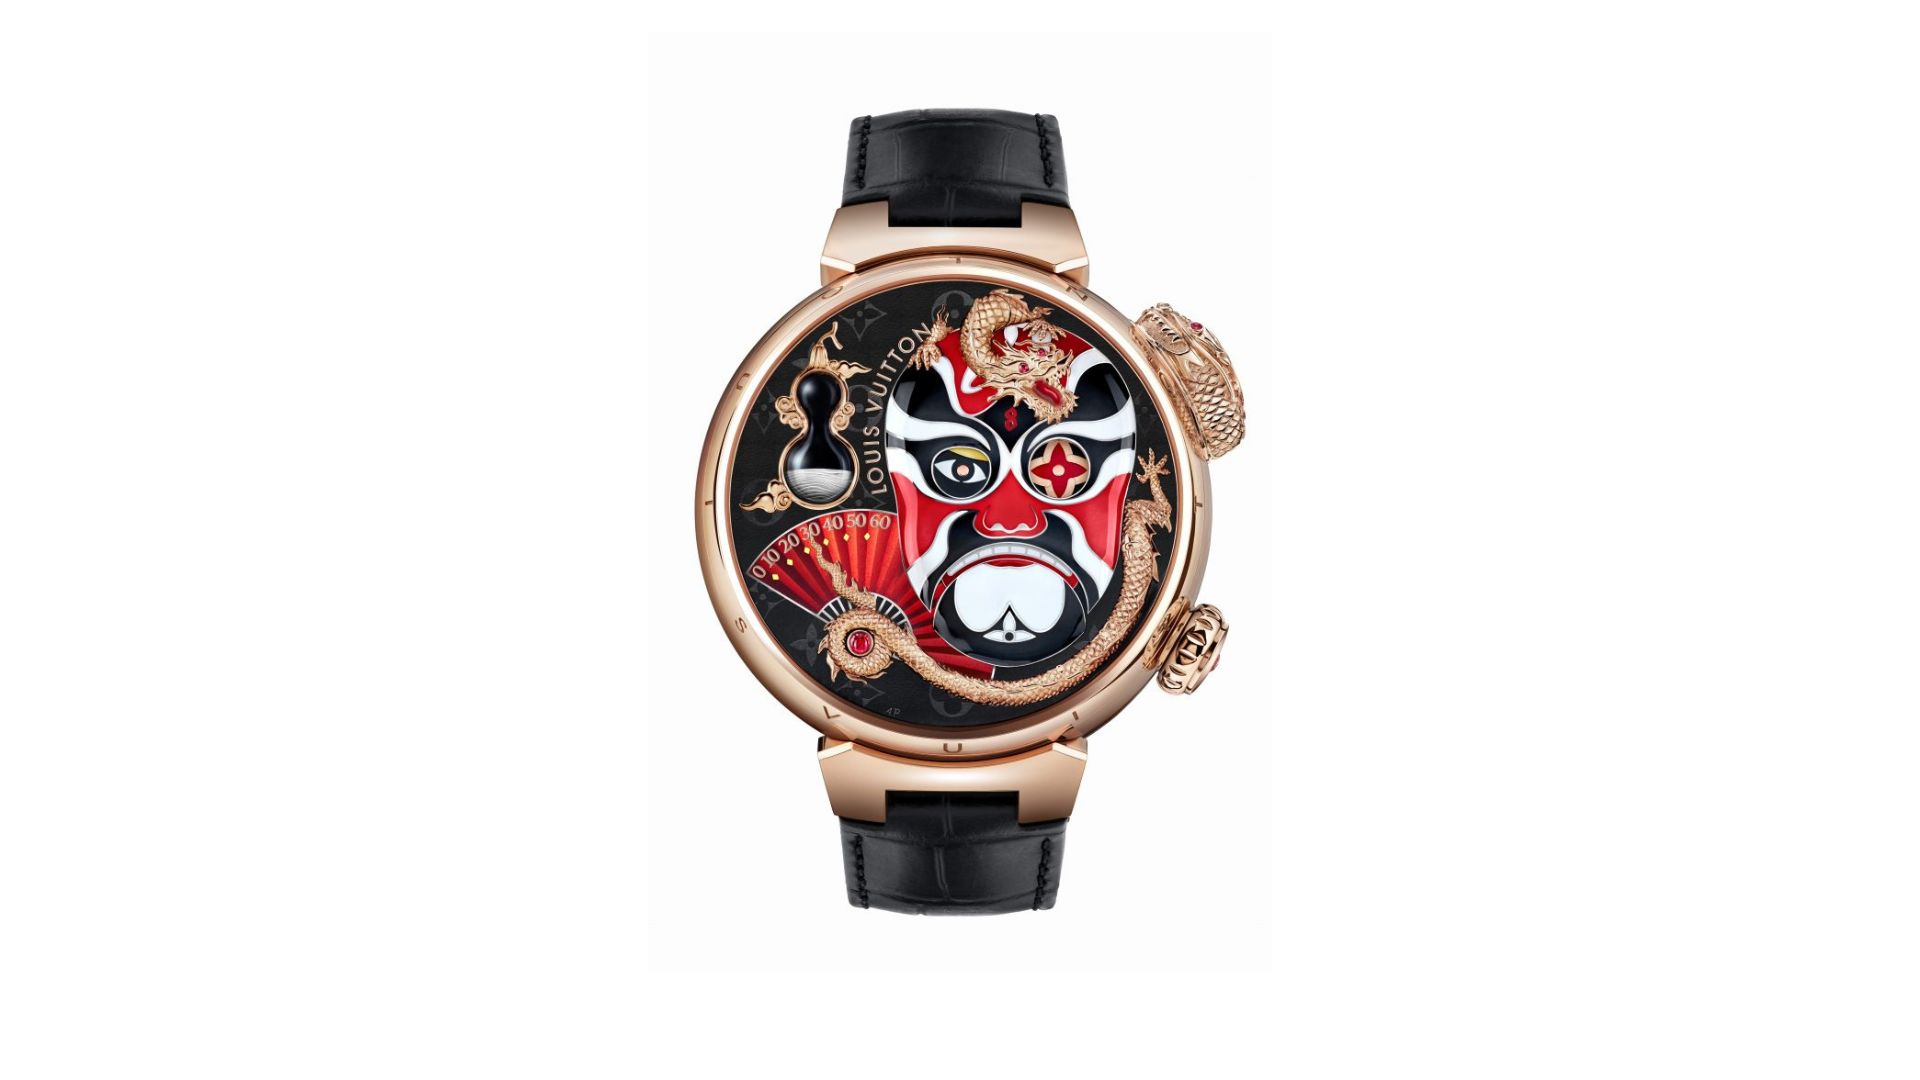 The new Louis Vuitton Tambour Opera Automata? A complicated LV